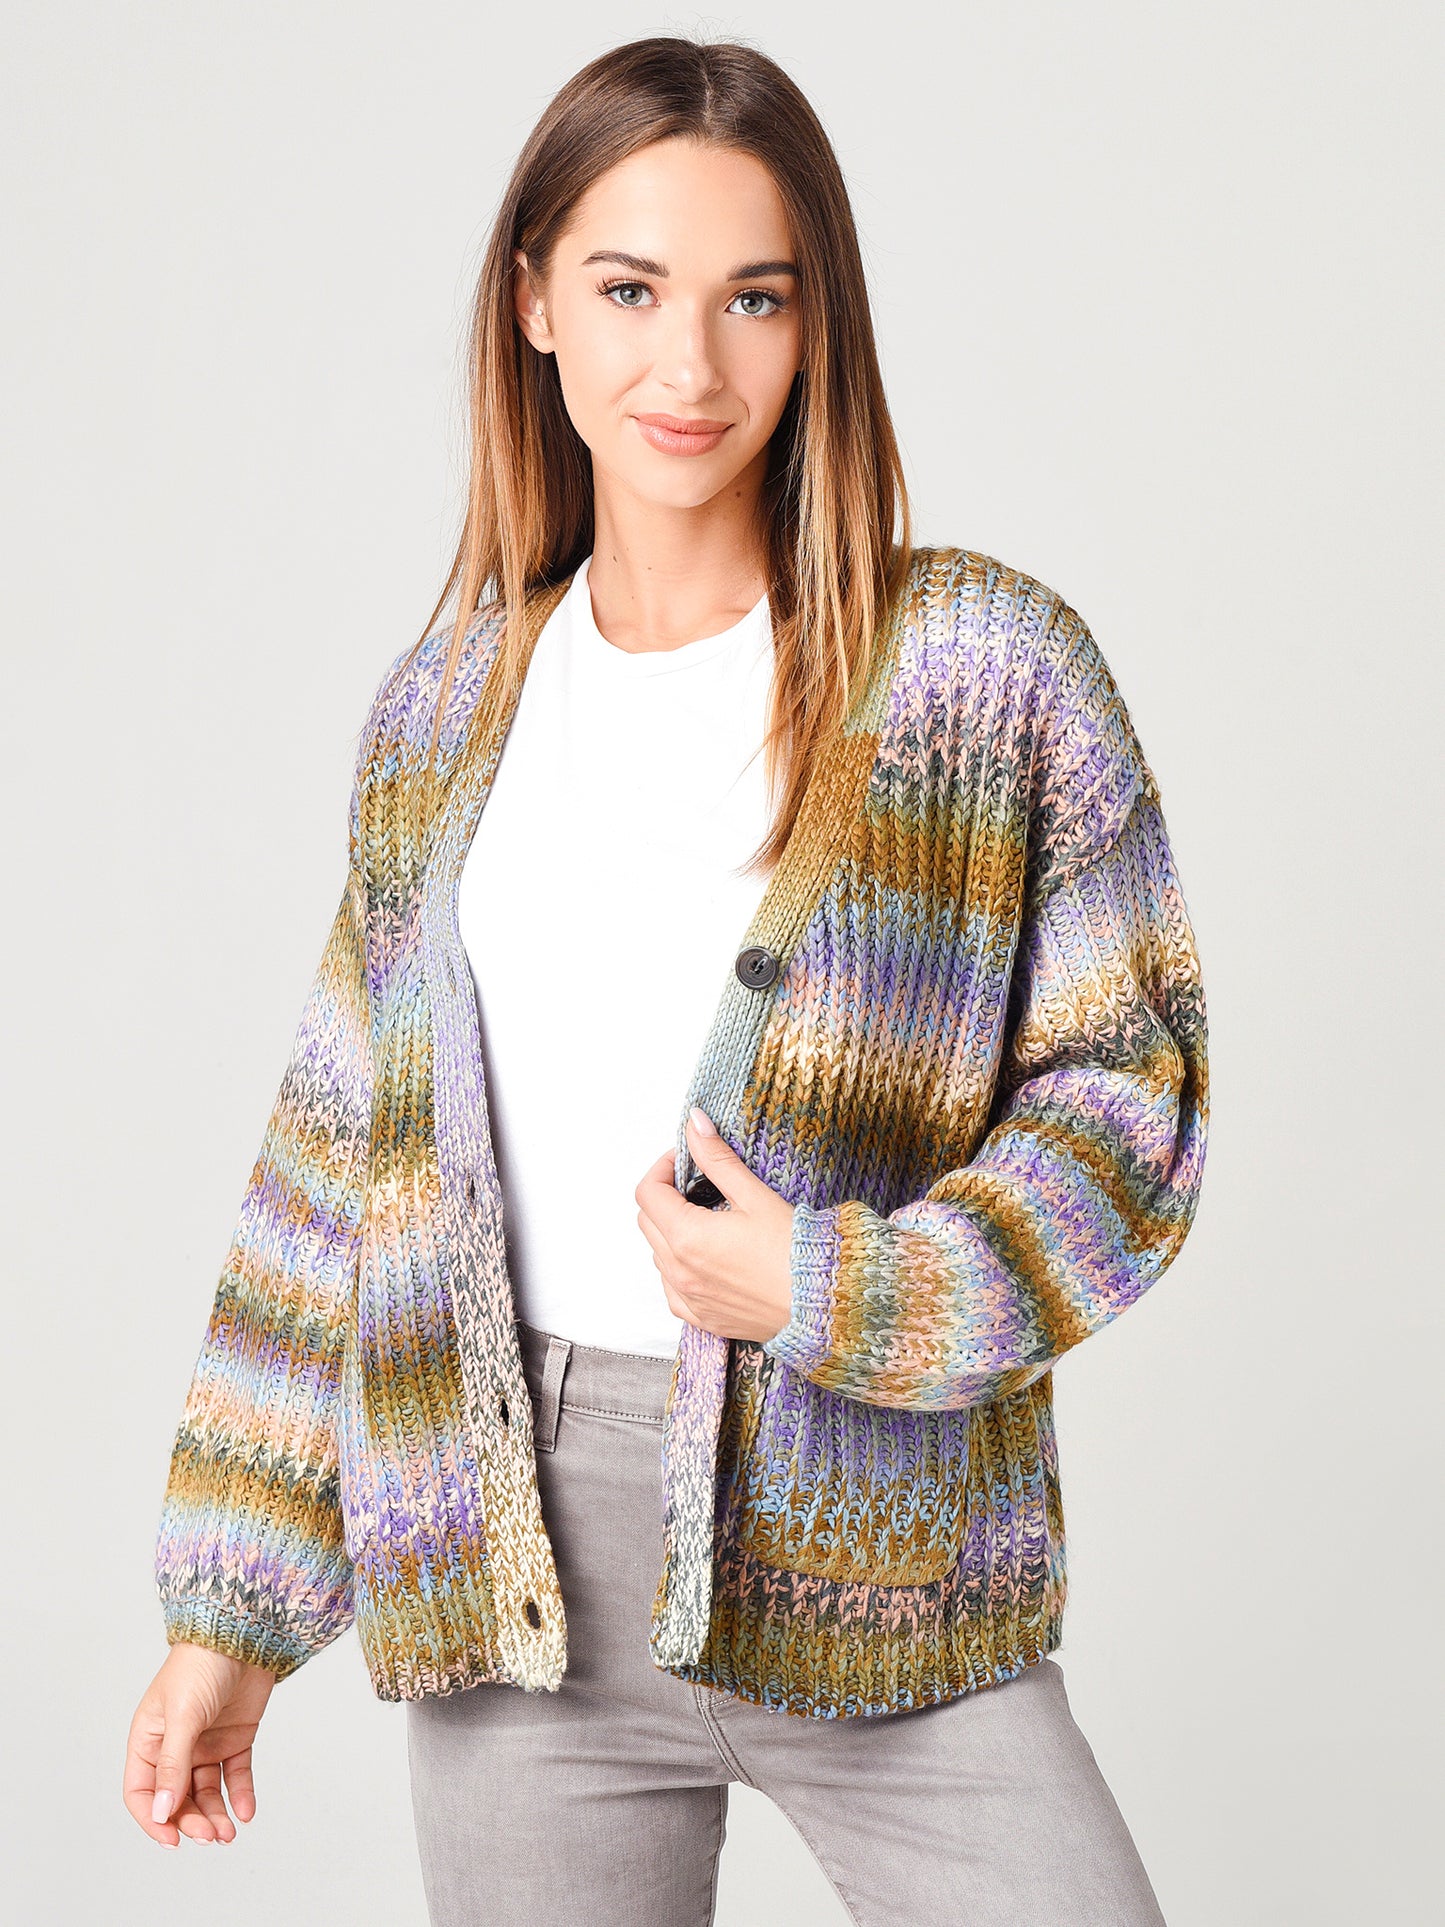 Cupcakes And Cashmere Women's Helena Cardigan